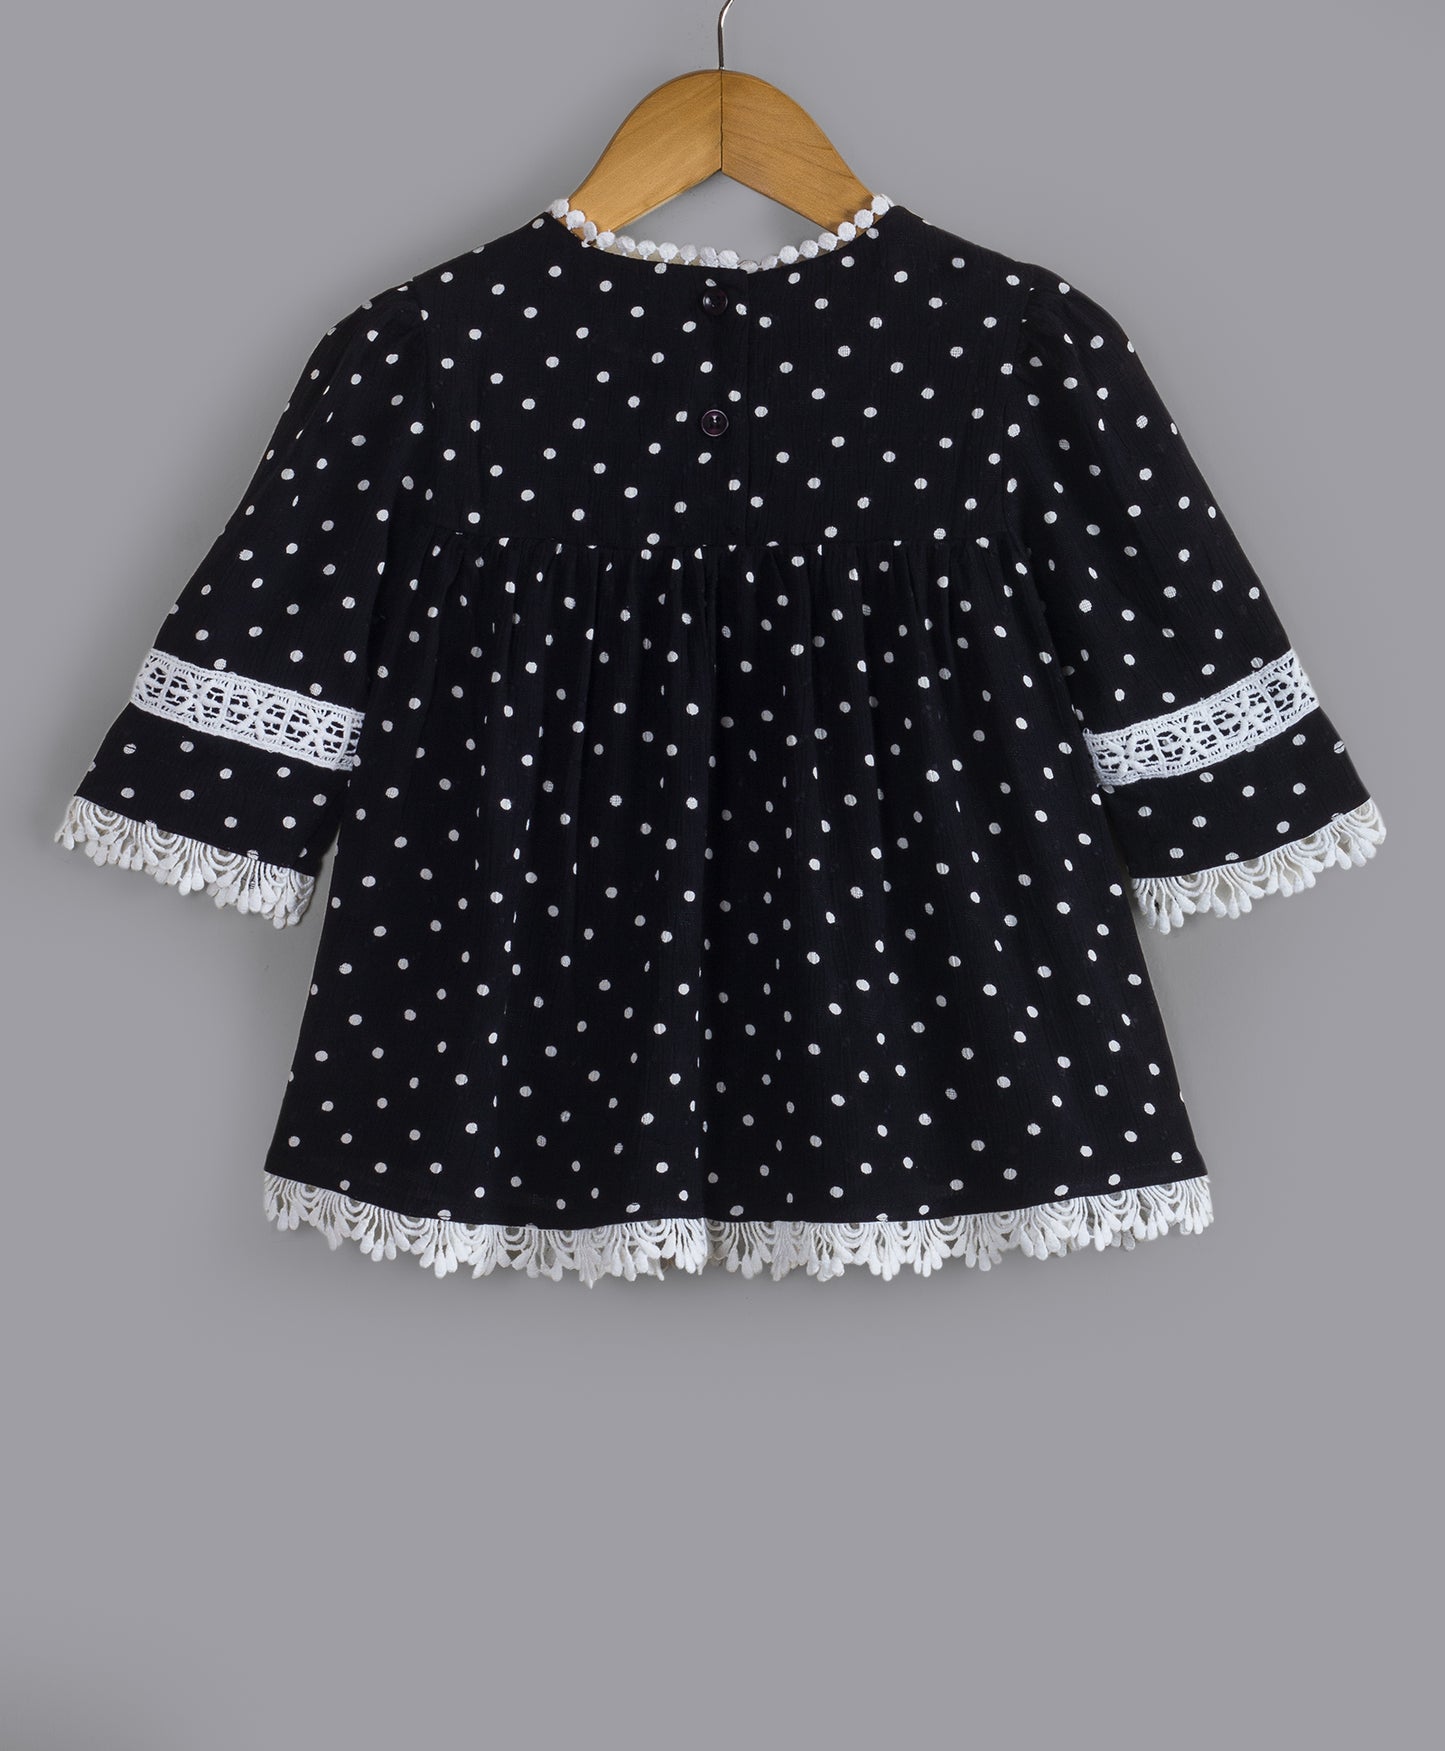 BLACK DOT PRINT TOP WITH CONTRAST LACE